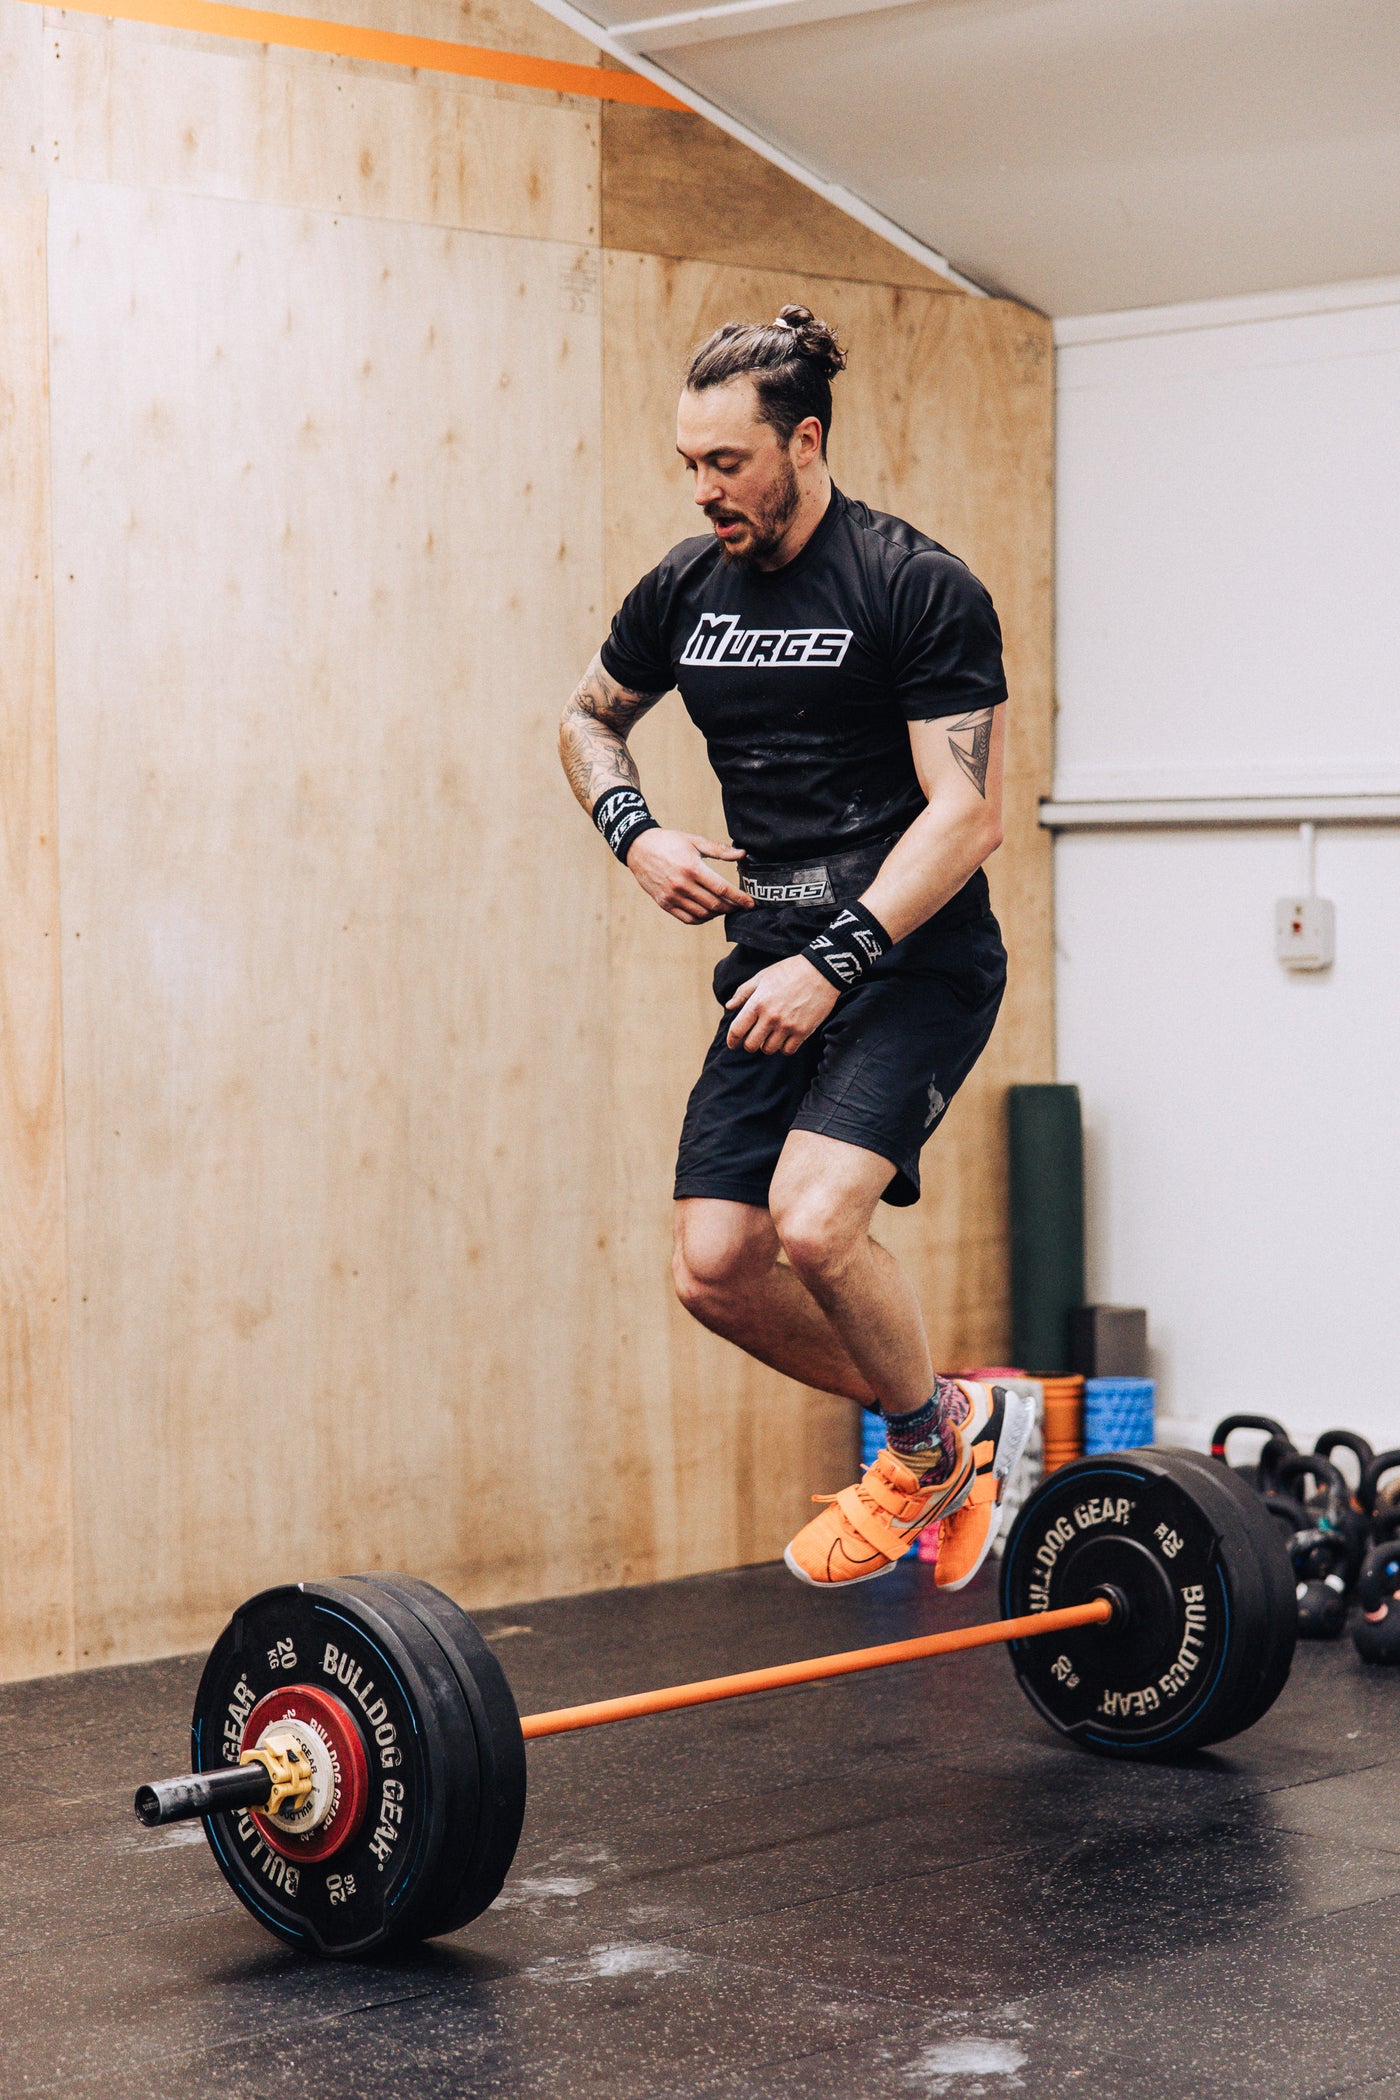 A detailed showcase of CrossFit workout attires designed for success. On one side, there's a Caucasian man in his late-20s, a pair of breathable, athletic shorts, a sweat-absorbent t-shirt, and the pe